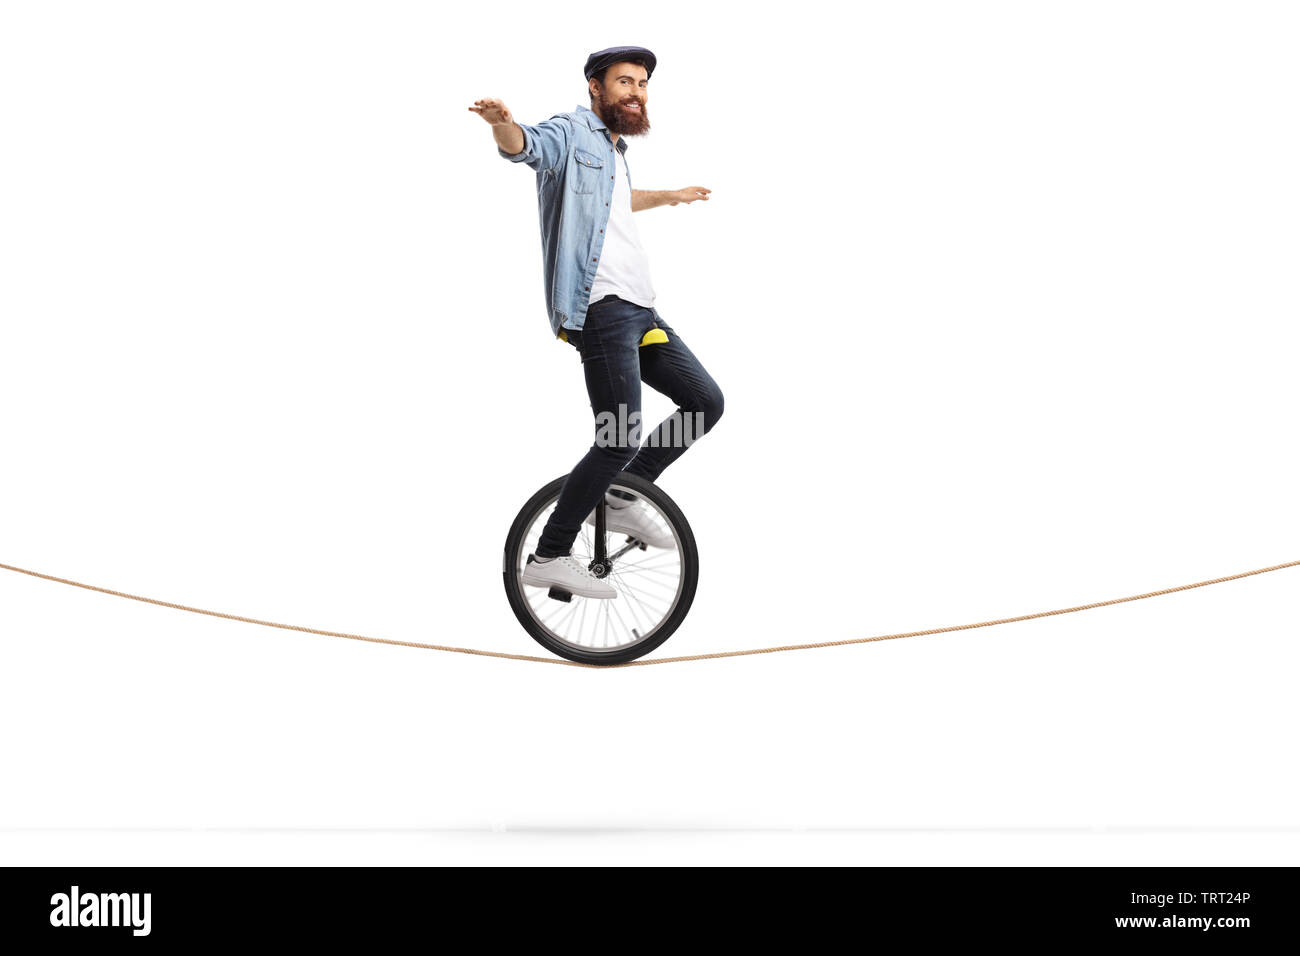 Full length shot of a man riding a unicycle on a rope and balancing with his hands isolated on white background Stock Photo